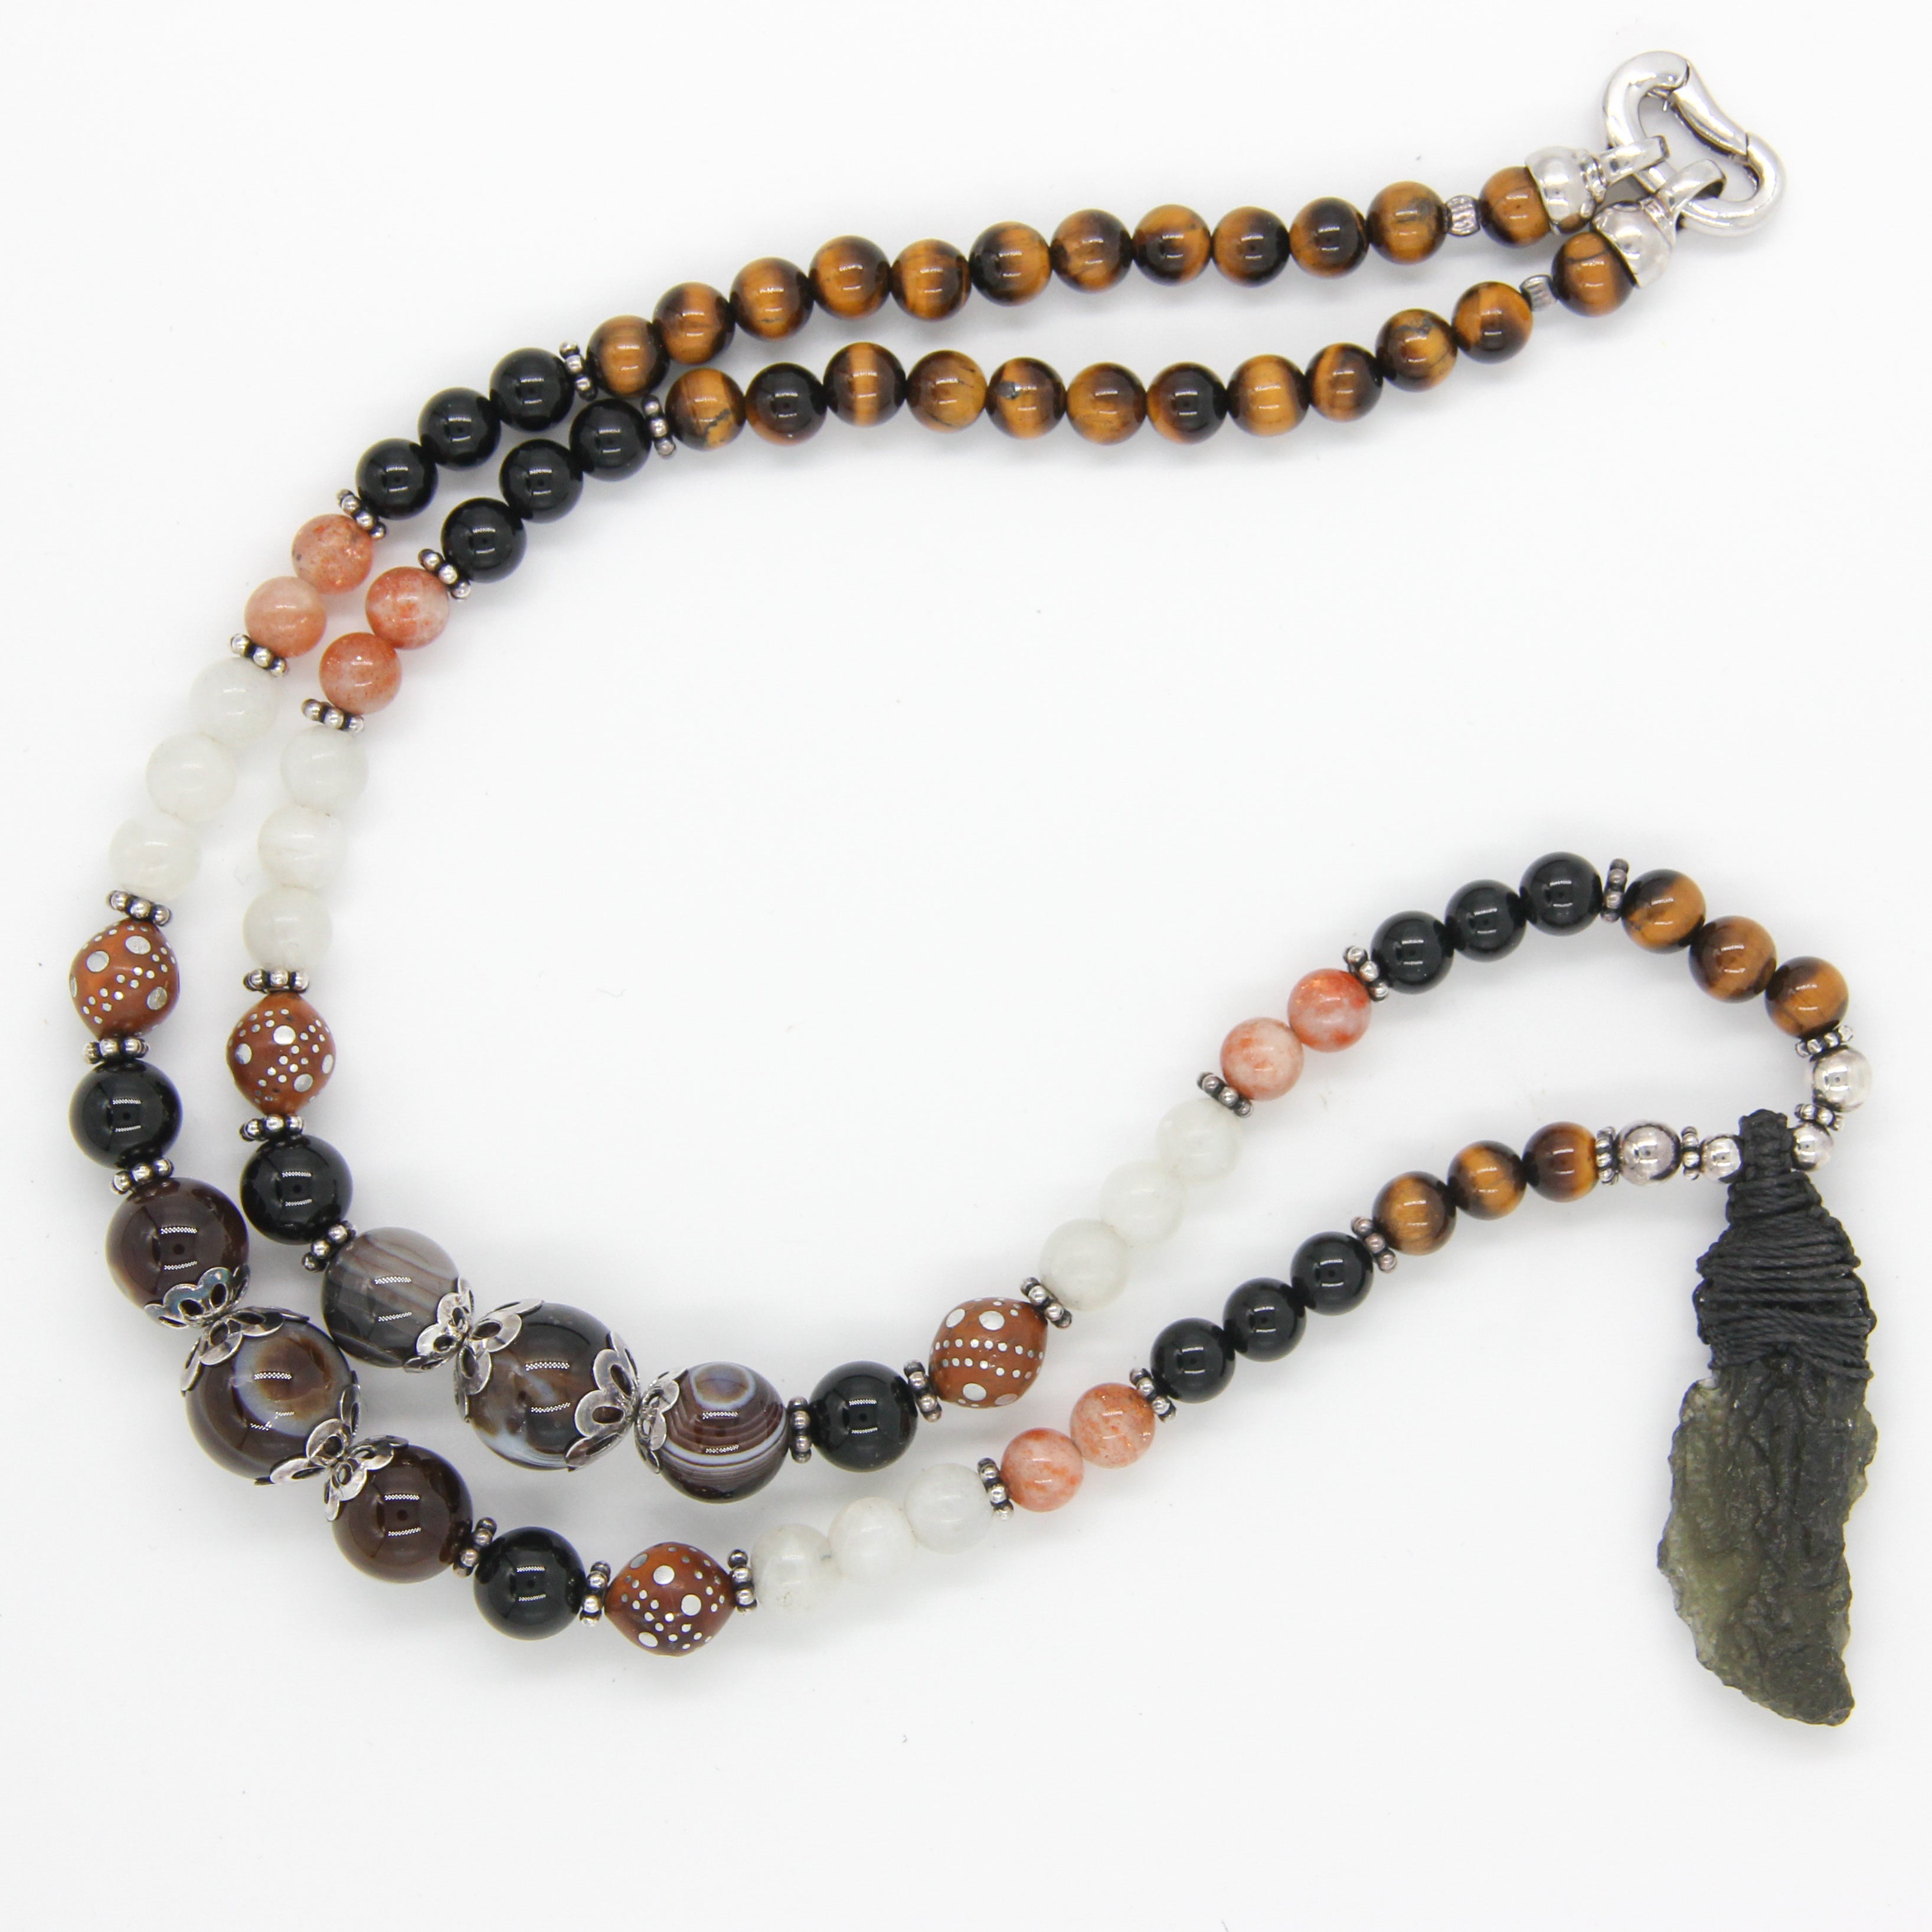 Moldavite Necklace with Tiger's Eye, Agate, Rainbow Moon Stone, Sun Stone, Onyx and Silver Beads